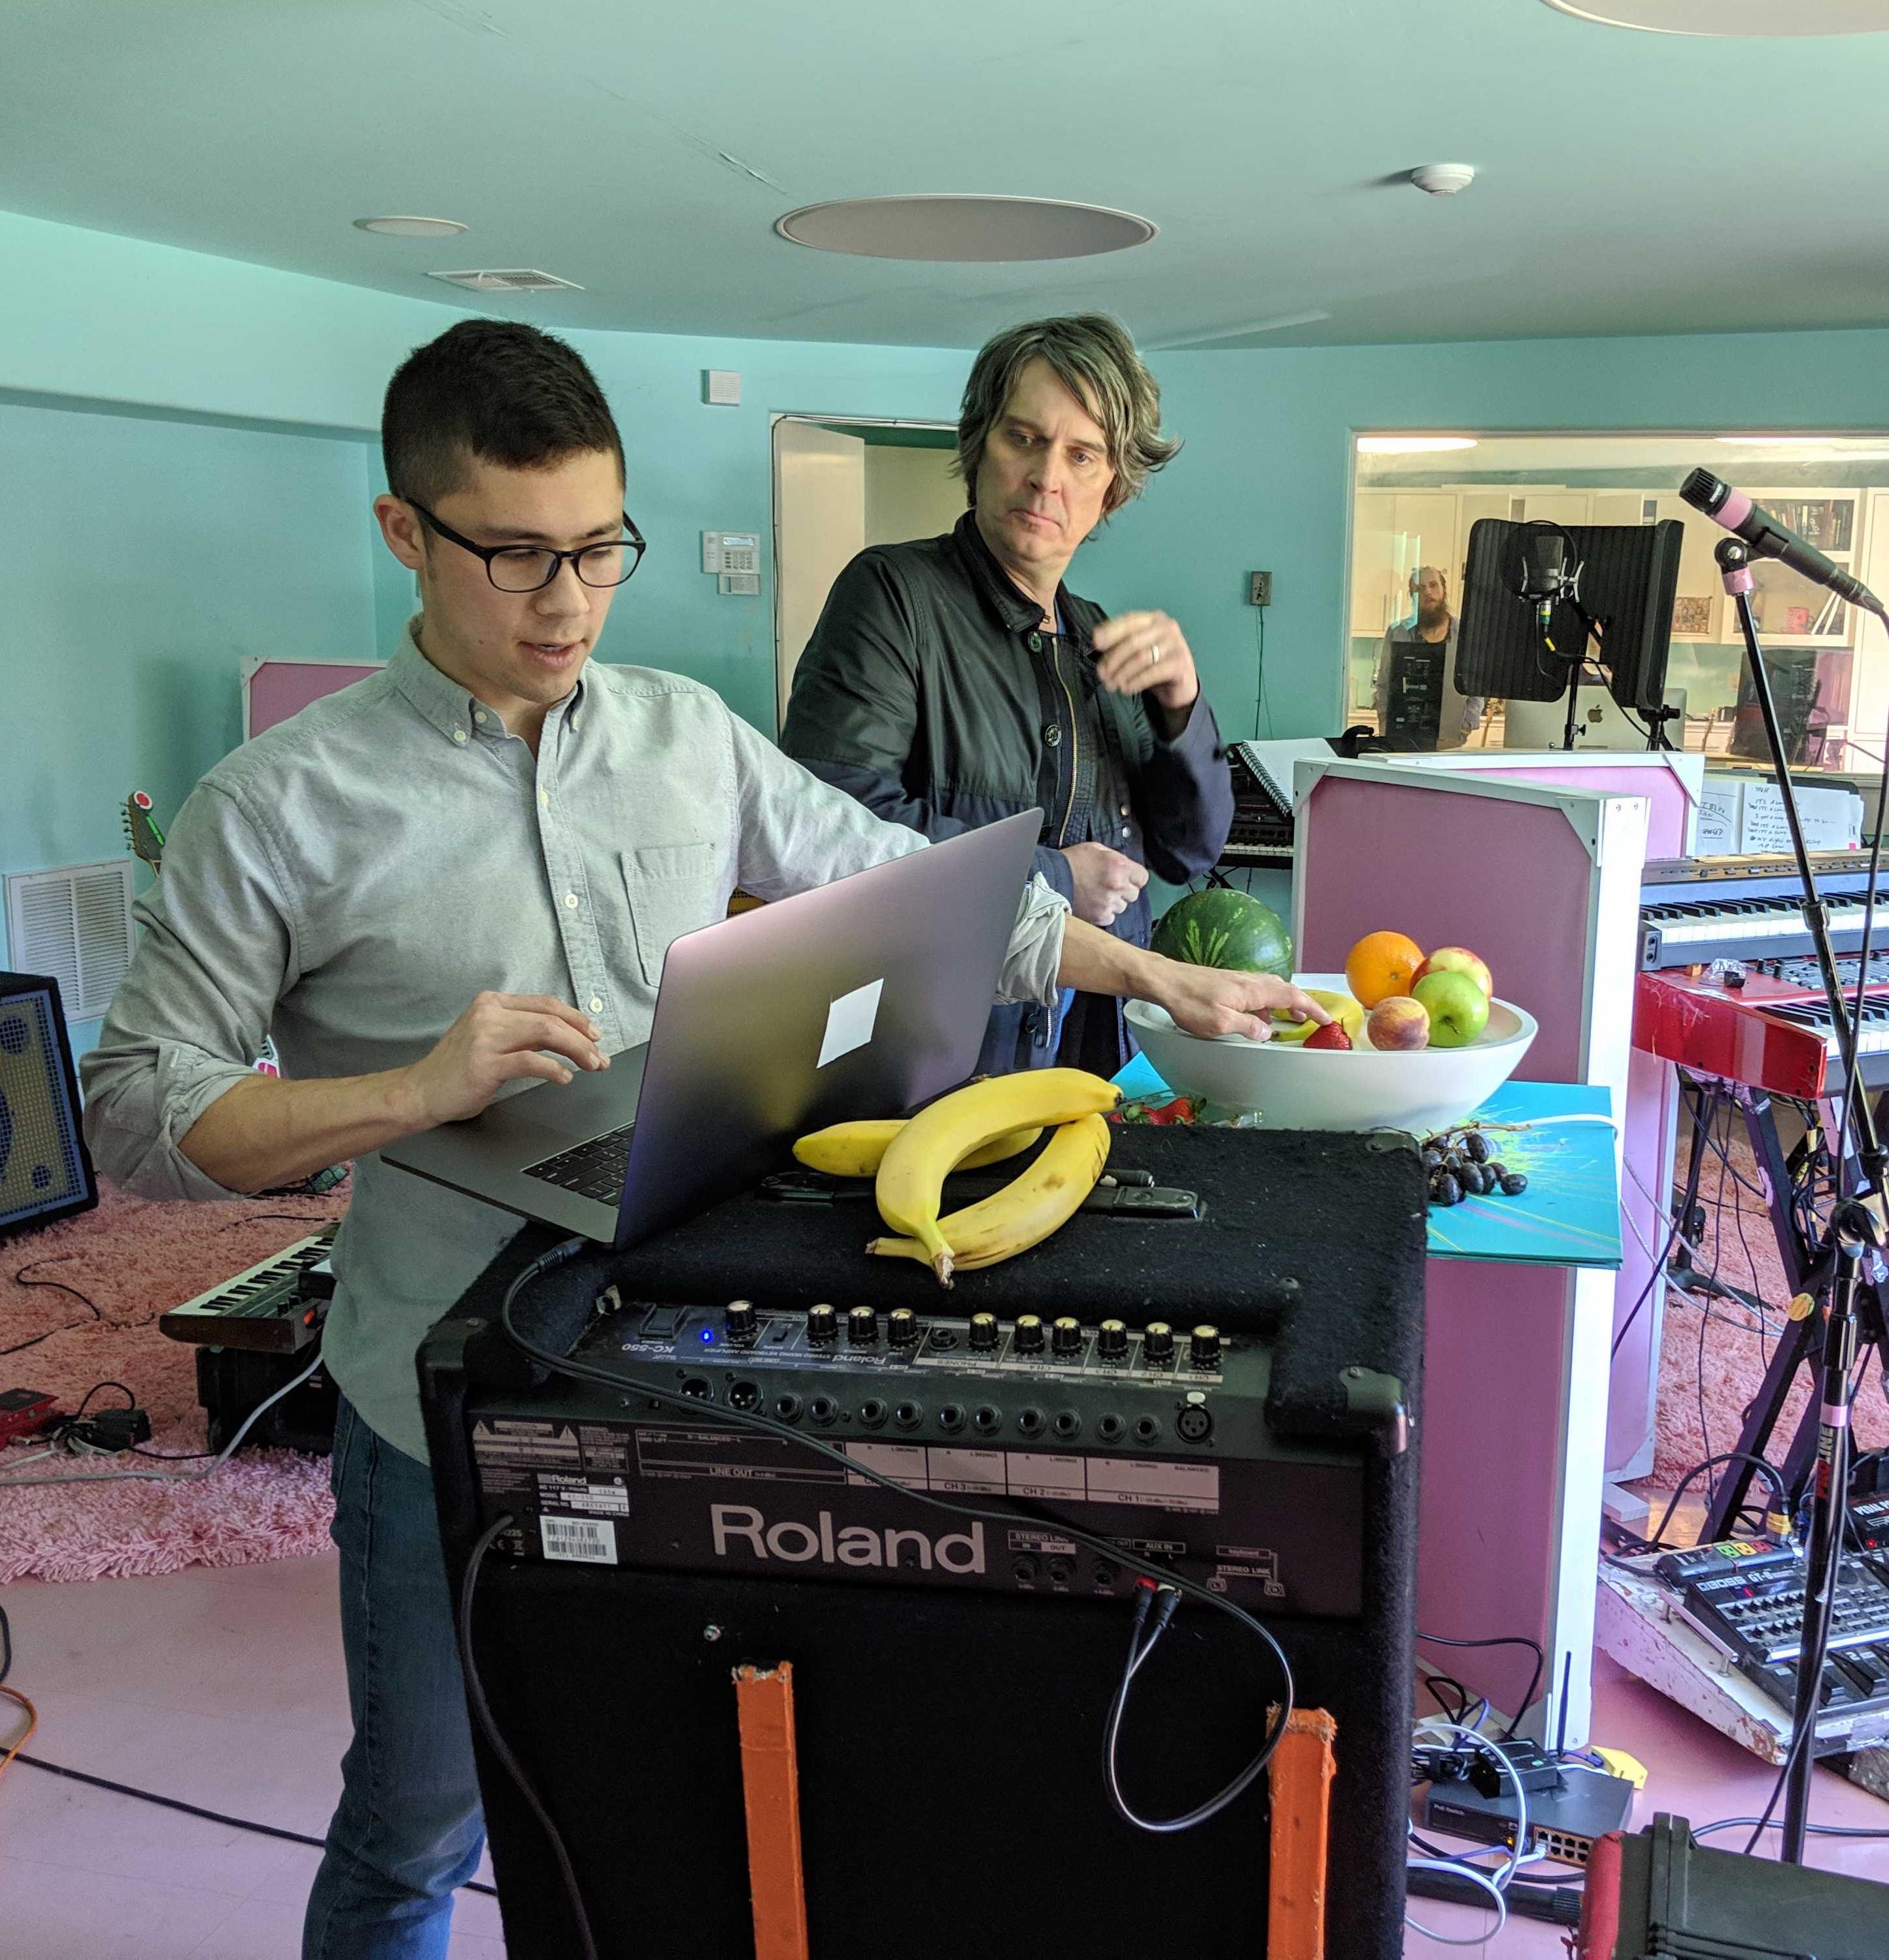 Mike Derrick (Deeplocal) tests the Fruit Genie with Steven Drozd (The Flaming Lips) during studio songwriting session.